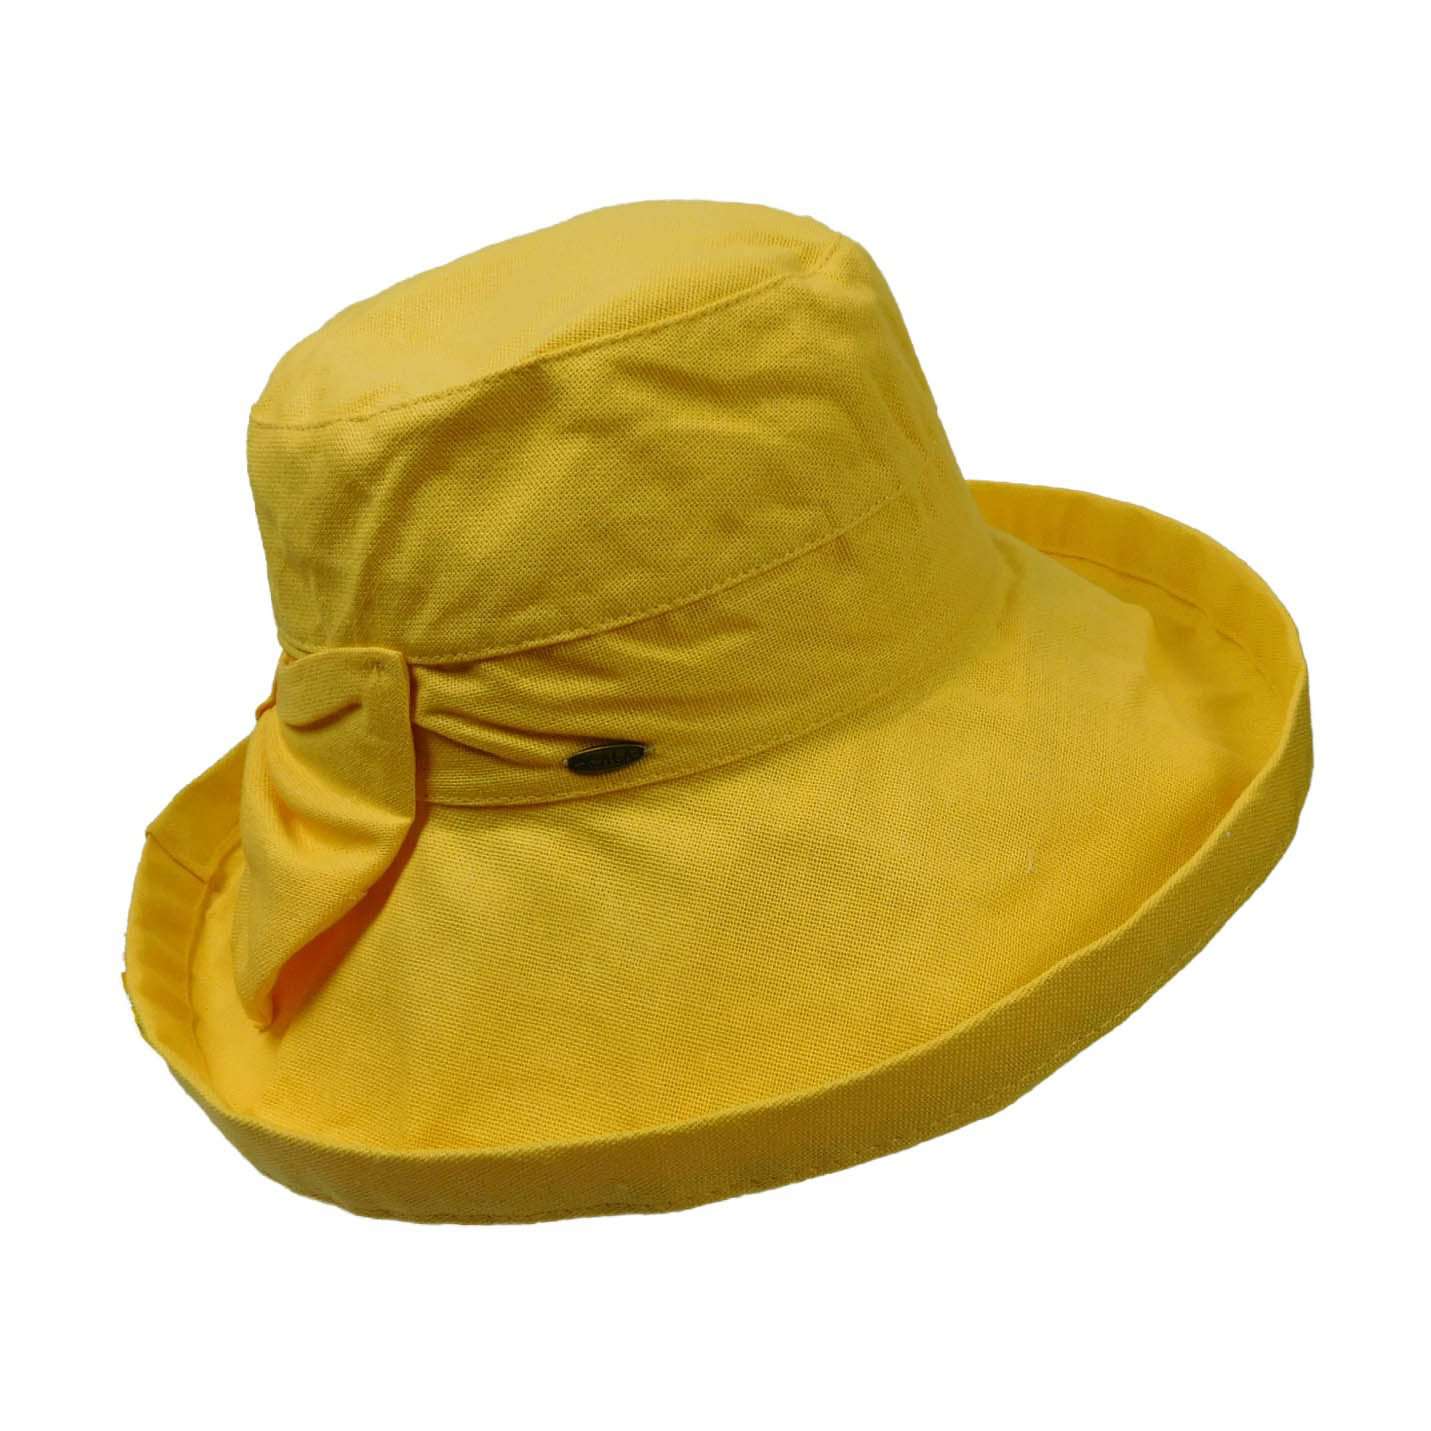 Kettle Brim Cotton Hat with Bow - Scala Hats Kettle Brim Hat Scala Hats WSCT638YL Yellow  